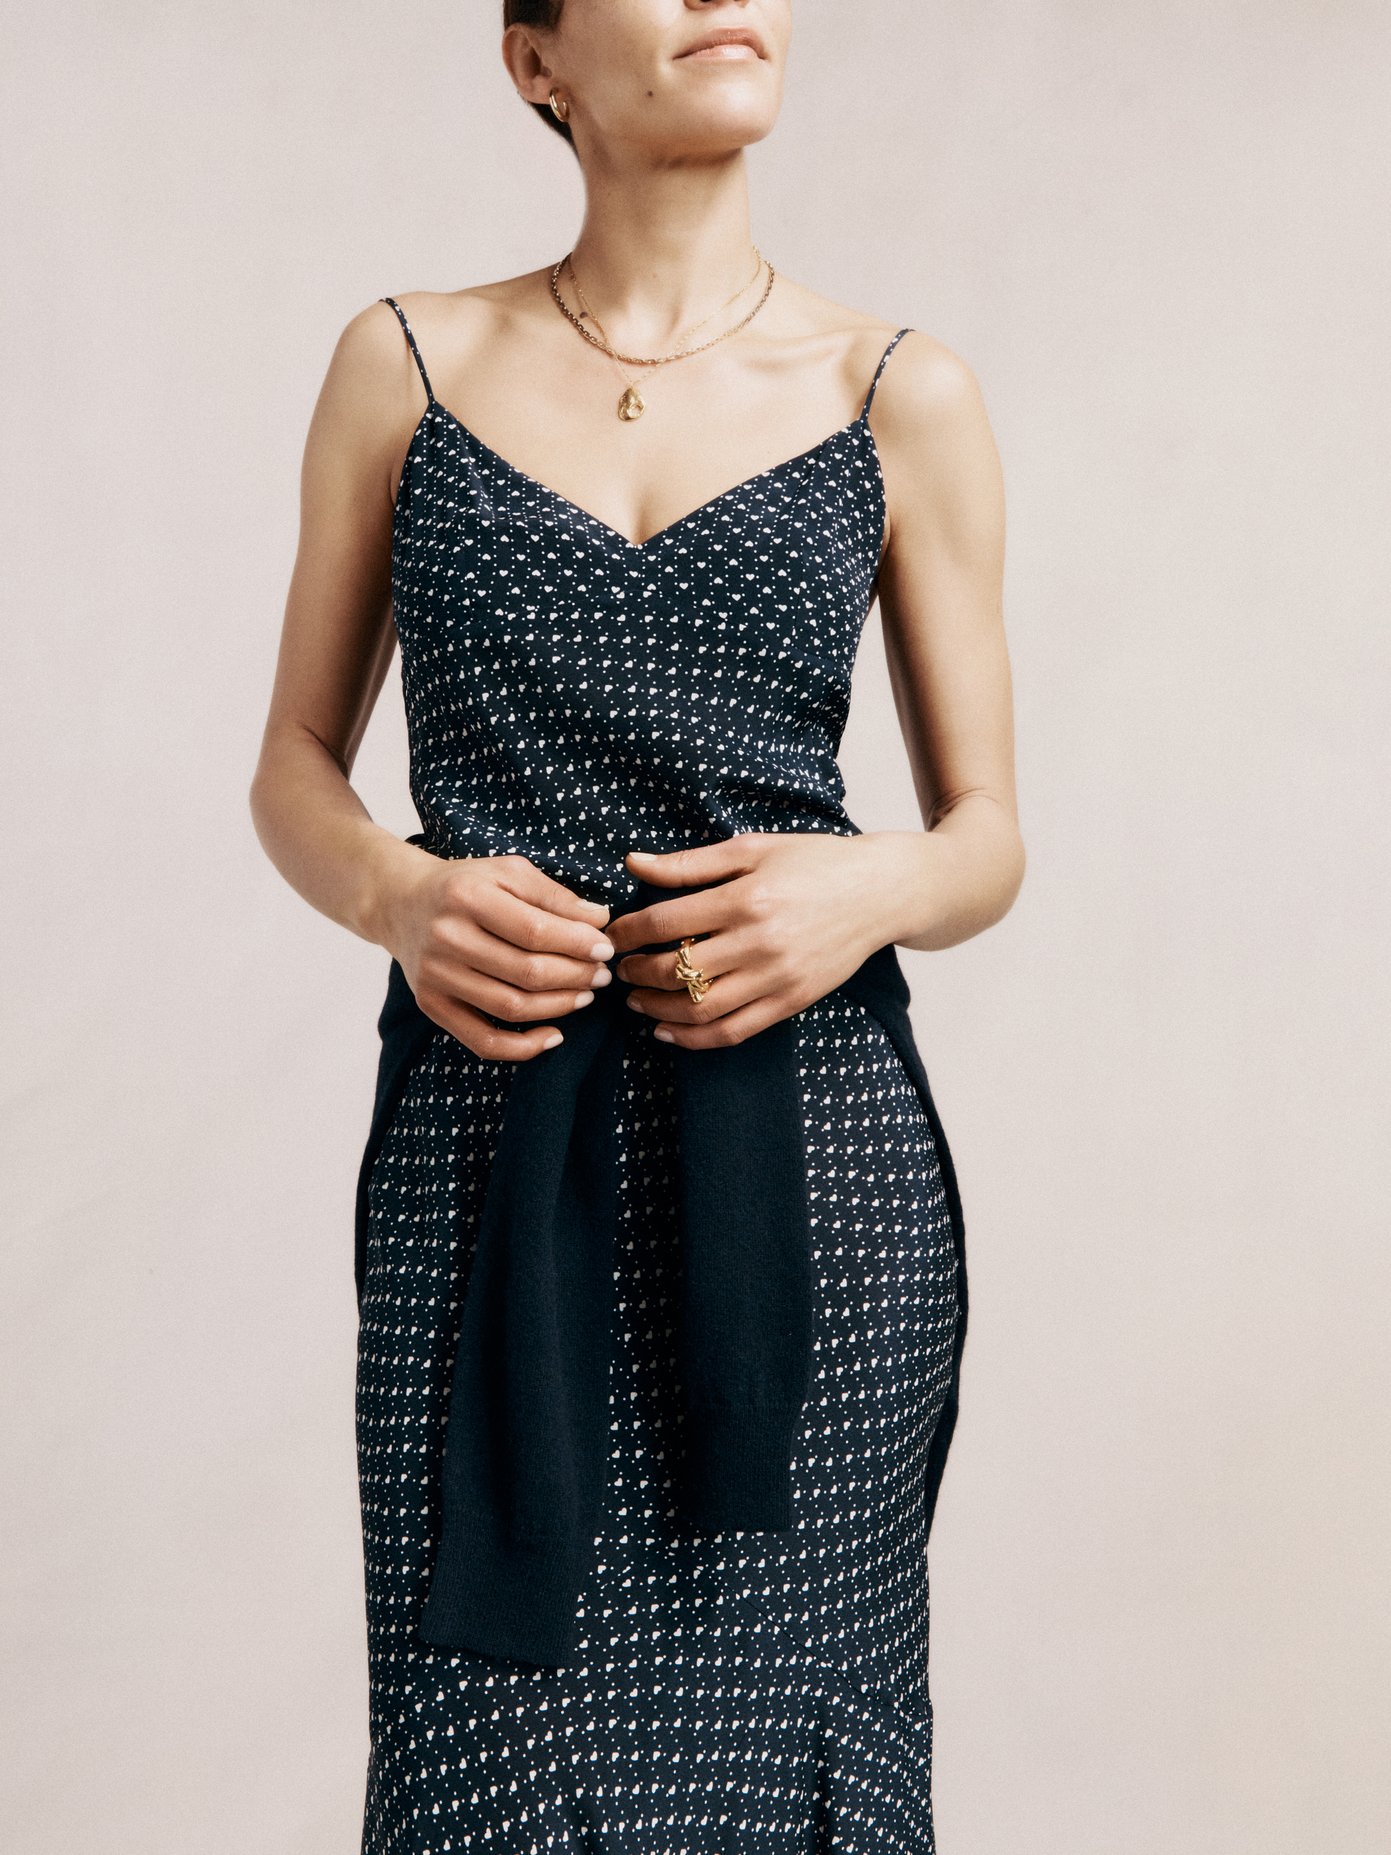 Raey's navy silk maxi dress is shaped with a deep V-neckline and sweeping fishtail hem, complete with a ditsy print comprised of miniature white hearts and polka dots.

